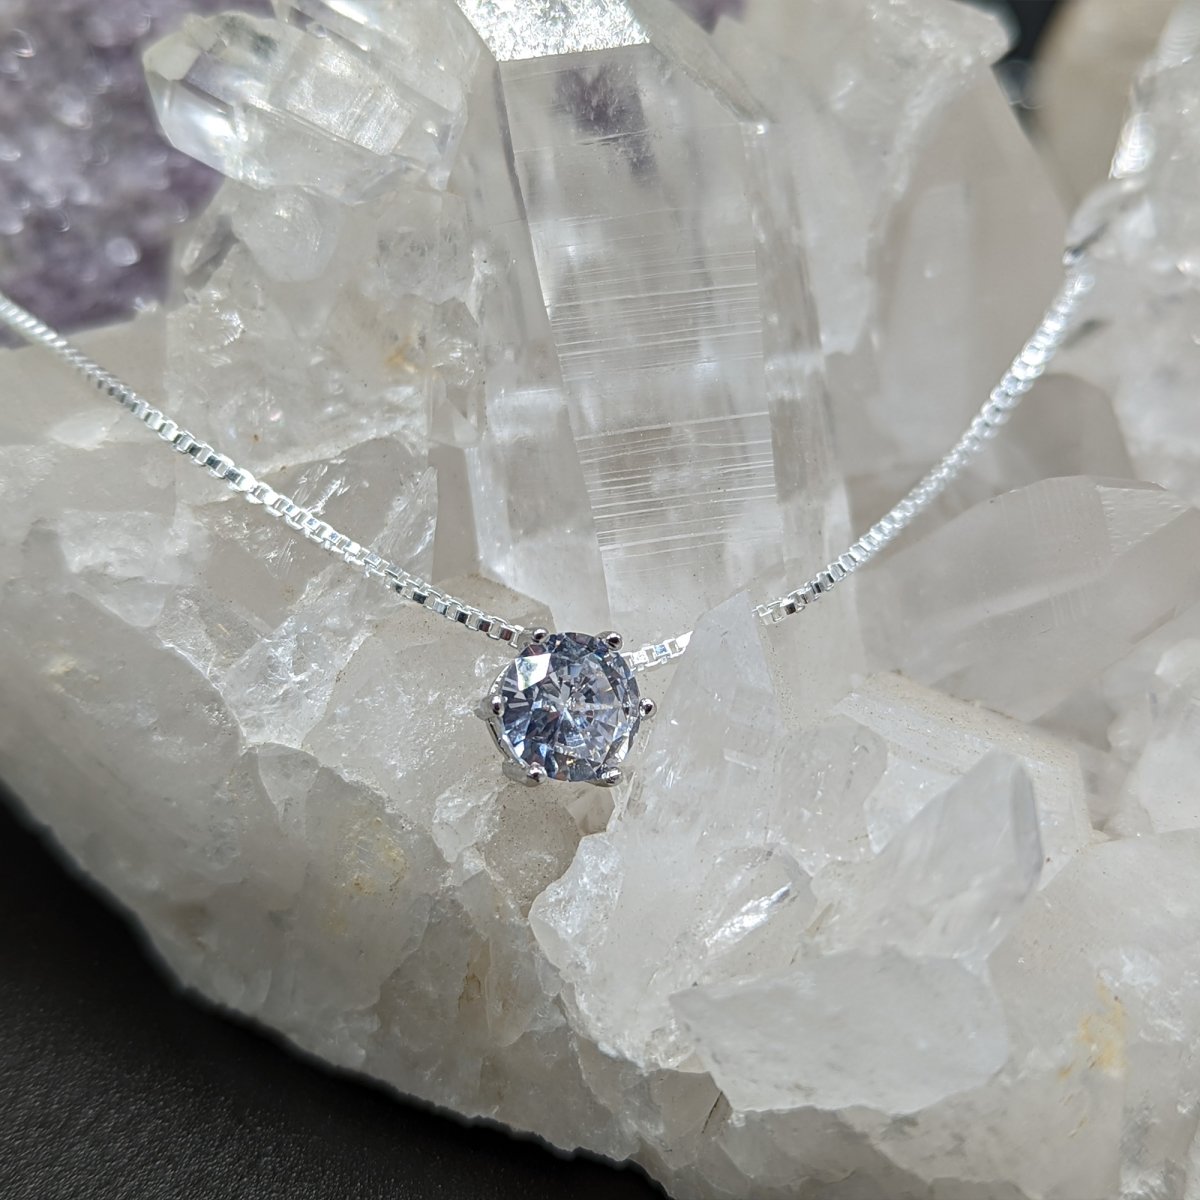 Godmother Gift - Dainty CZ Sterling Silver Necklace - Meaningful Cards